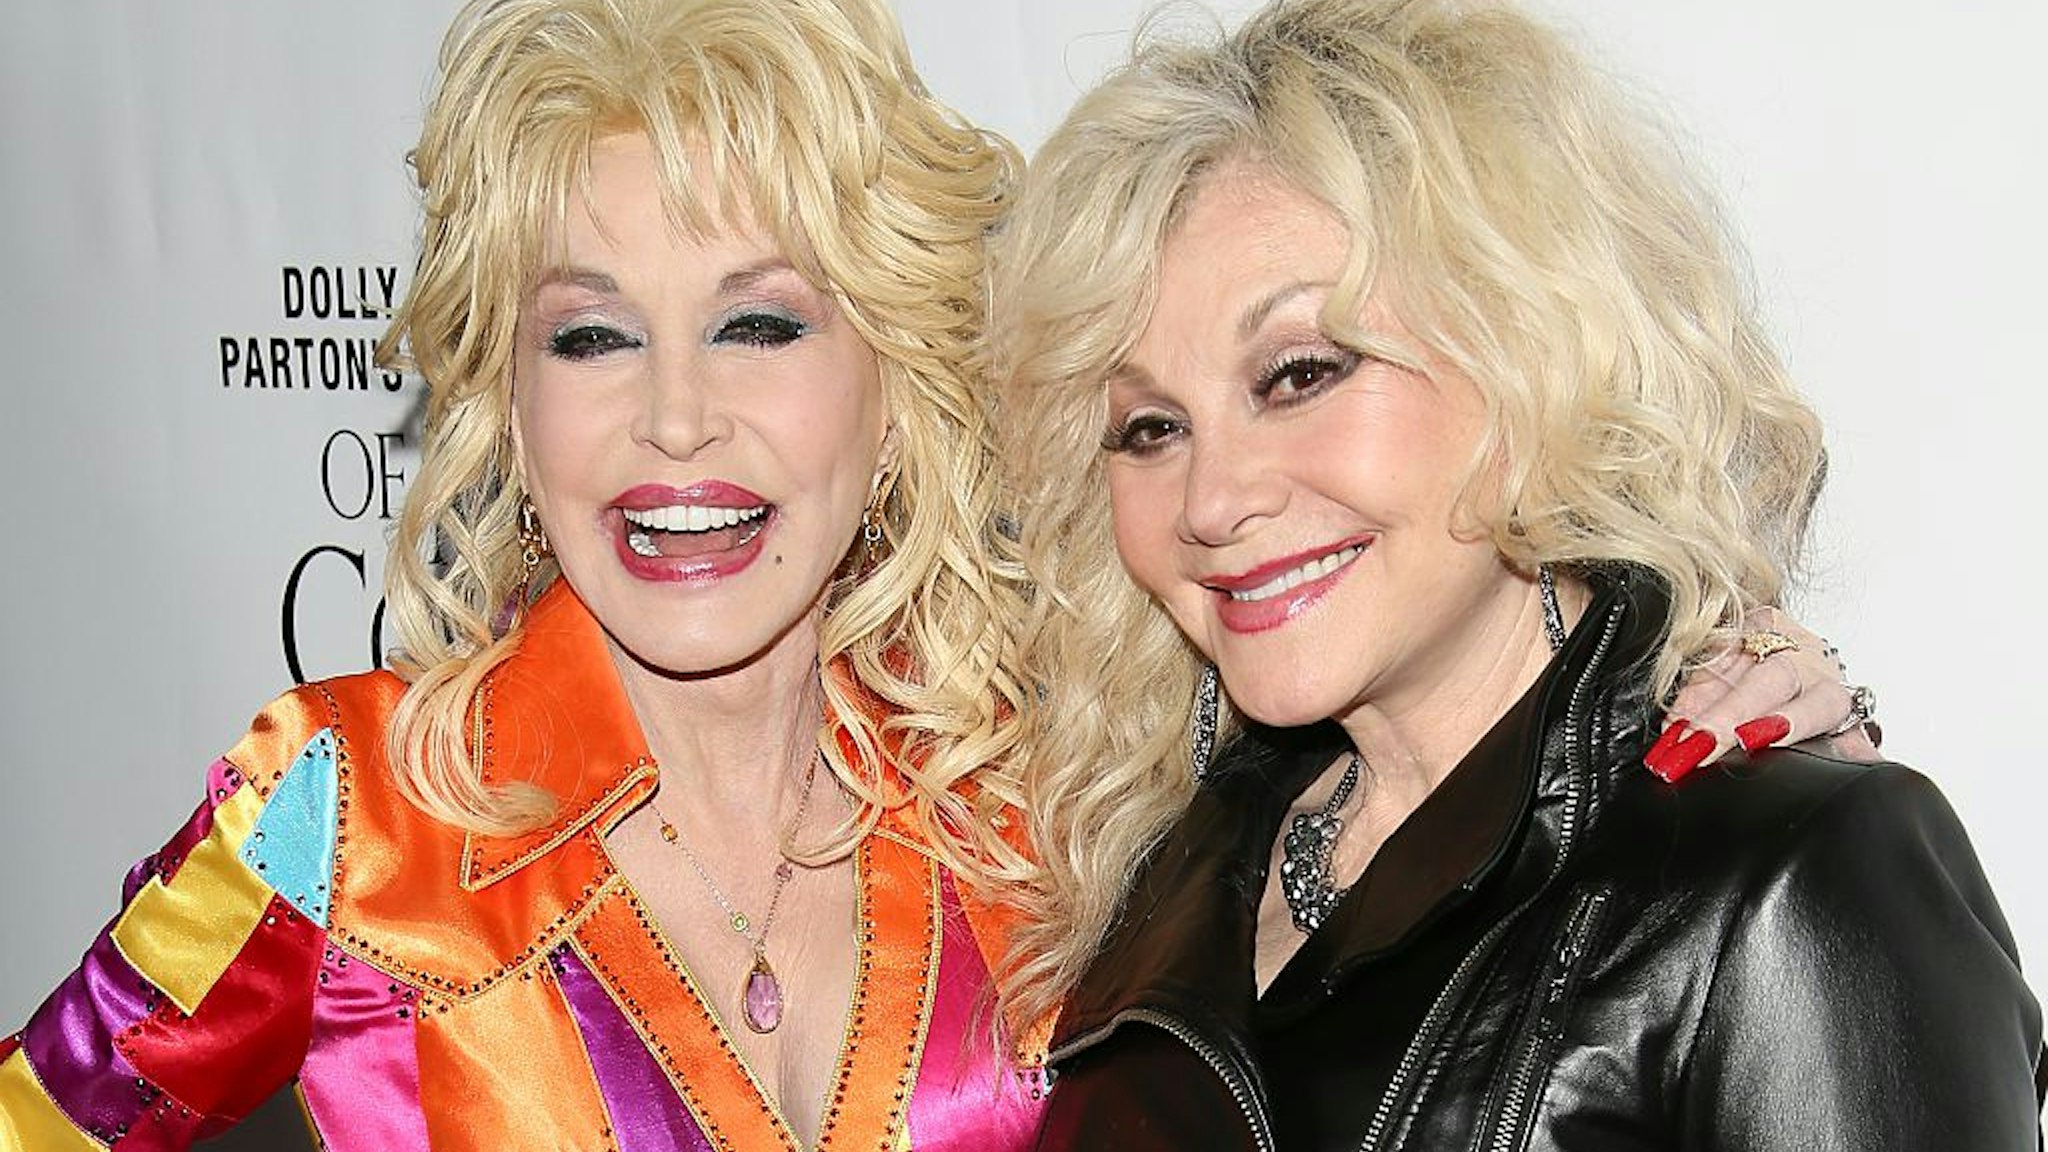 Stella and Dolly parton